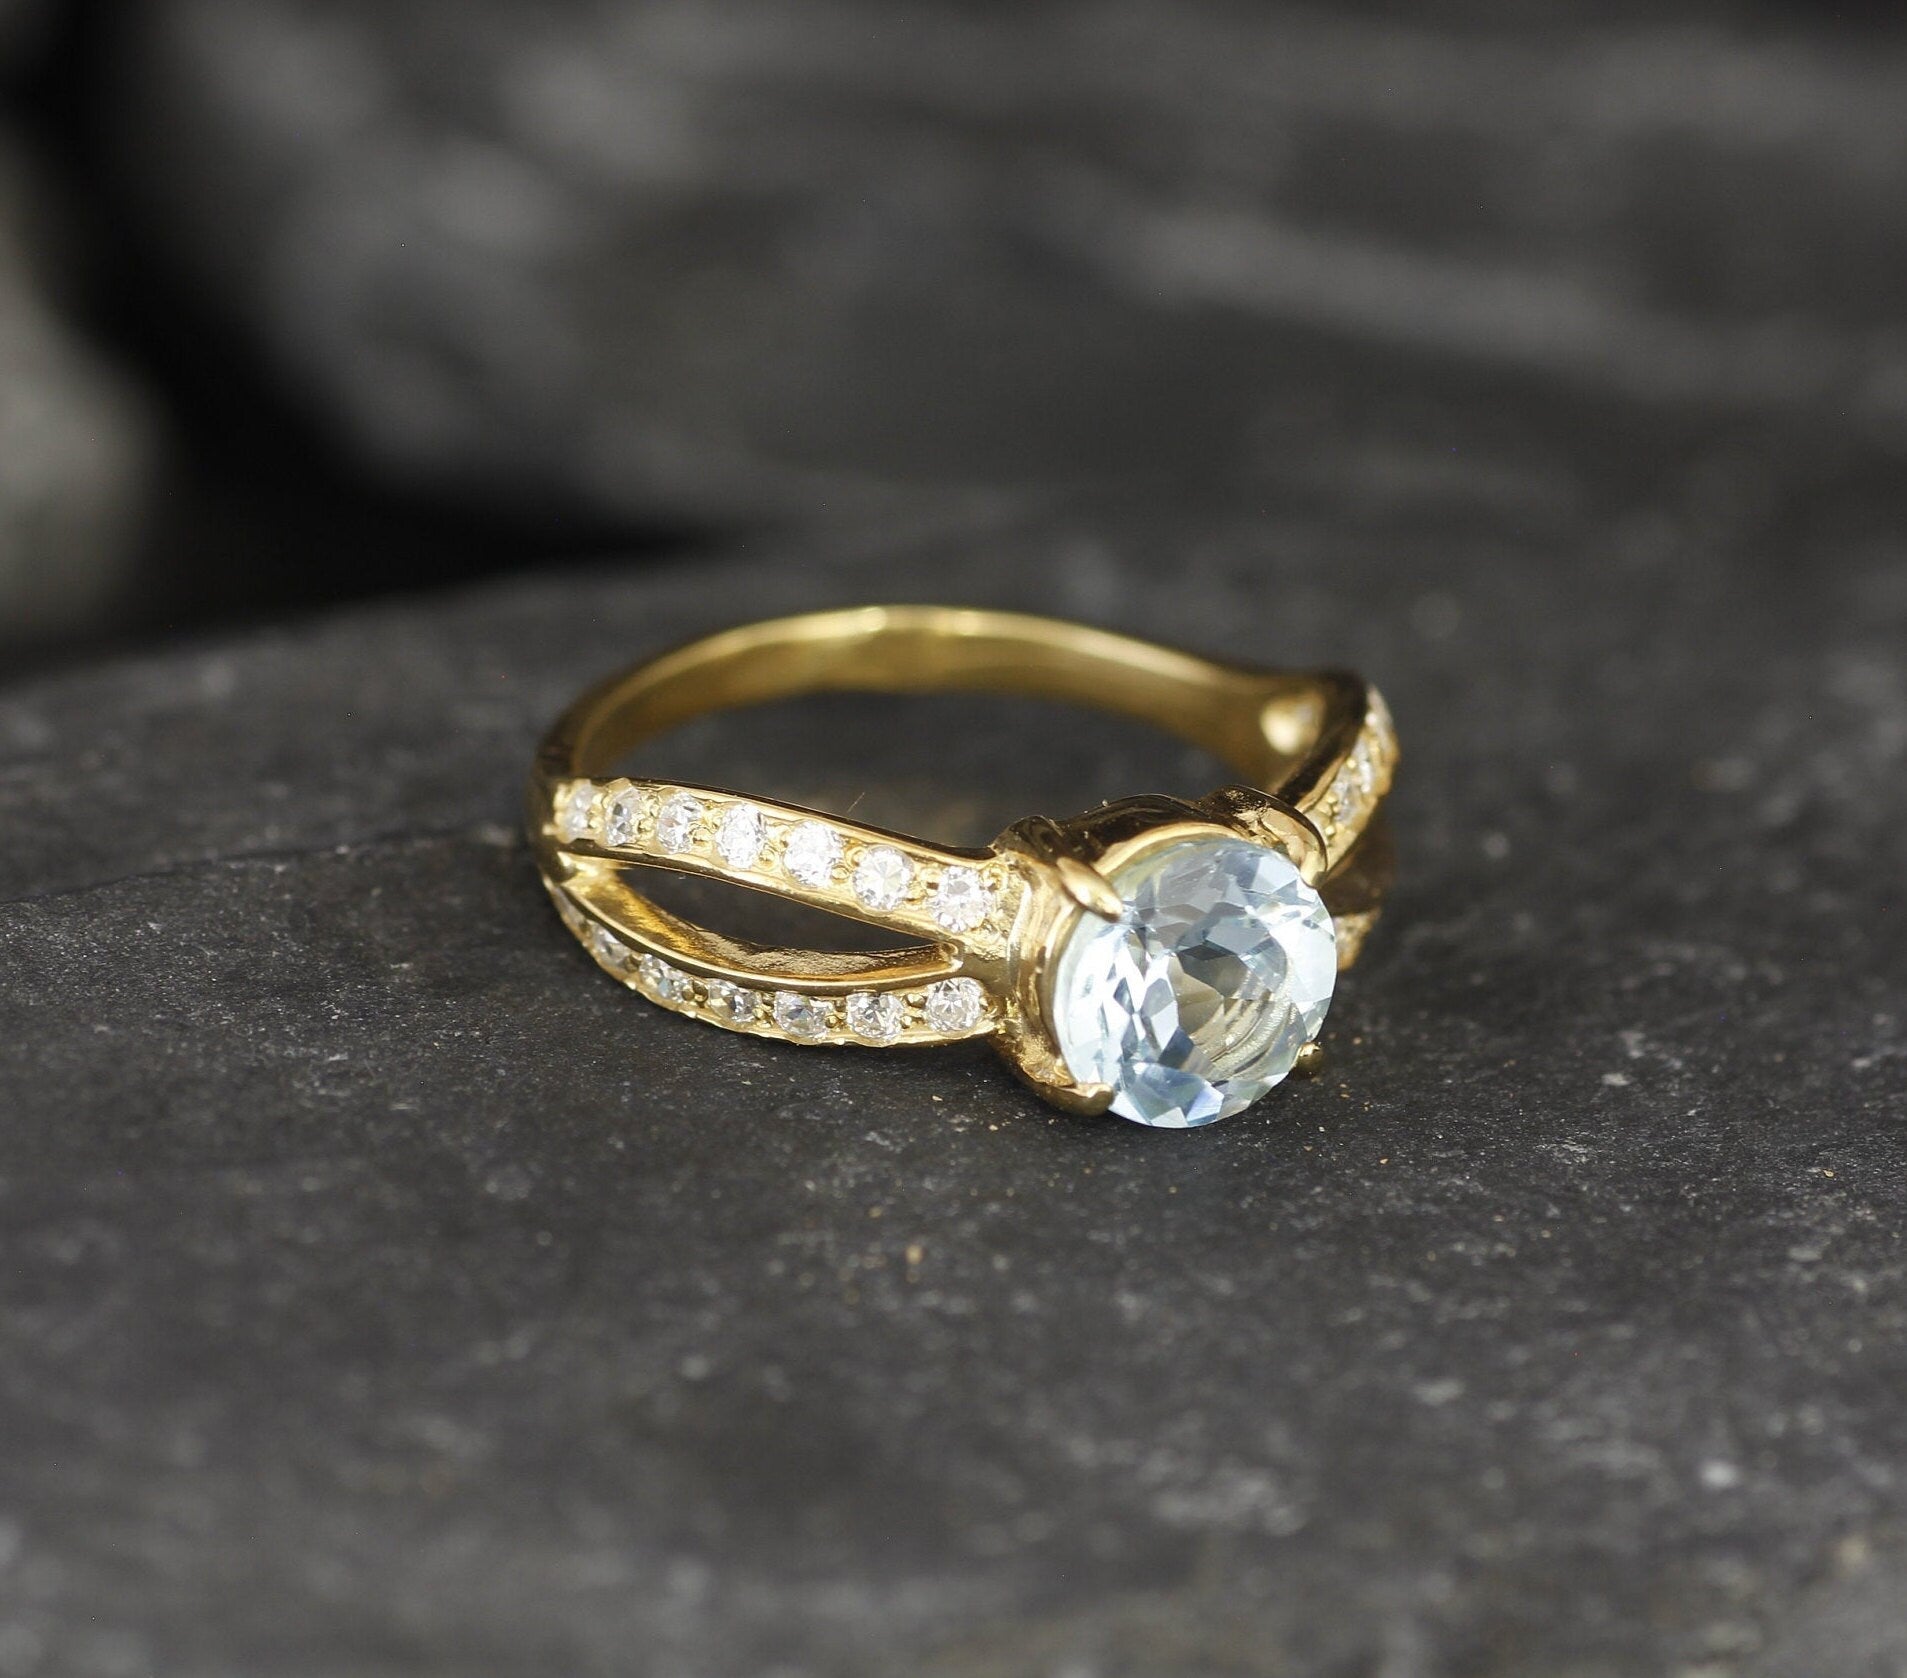 Engagement Ring, Natural Blue Topaz, Gold Plated Ring, December Birthstone, Round Ring, 2 Carat Ring, Blue Proposal Ring, Gold Vermeil Ring